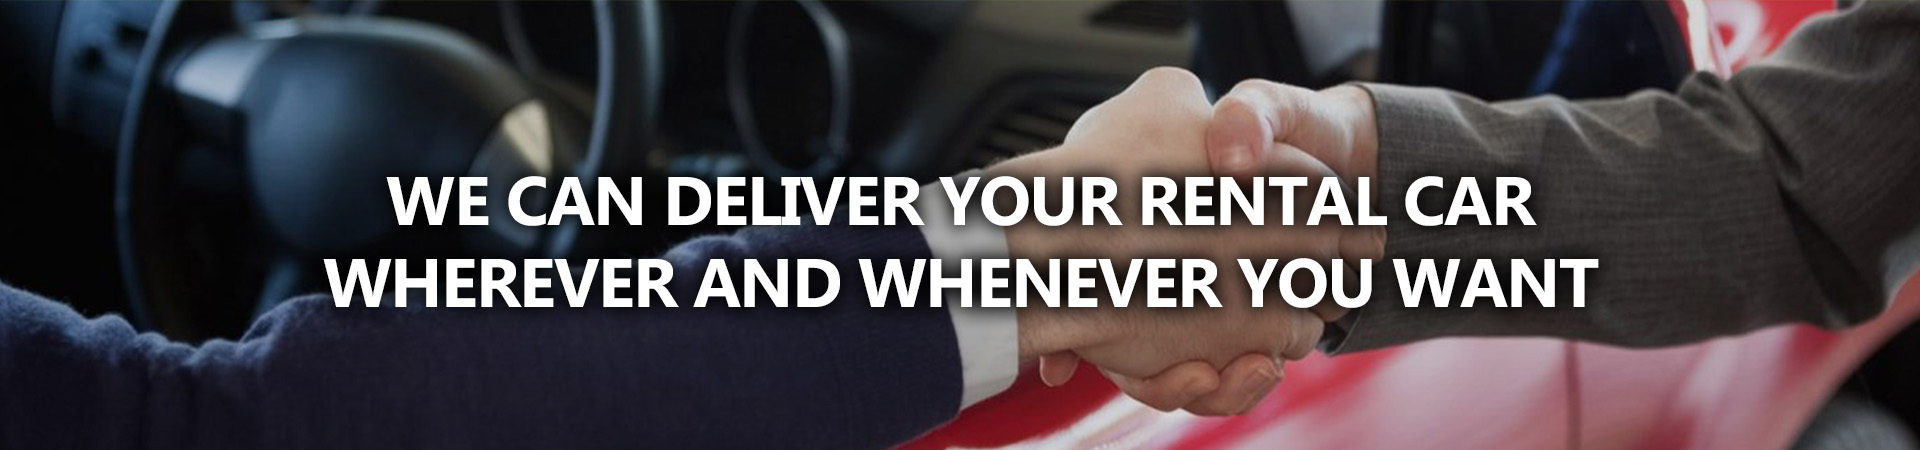 YOUR RENTAL CAR WHEREVER AND WHENEVER YOU WANT